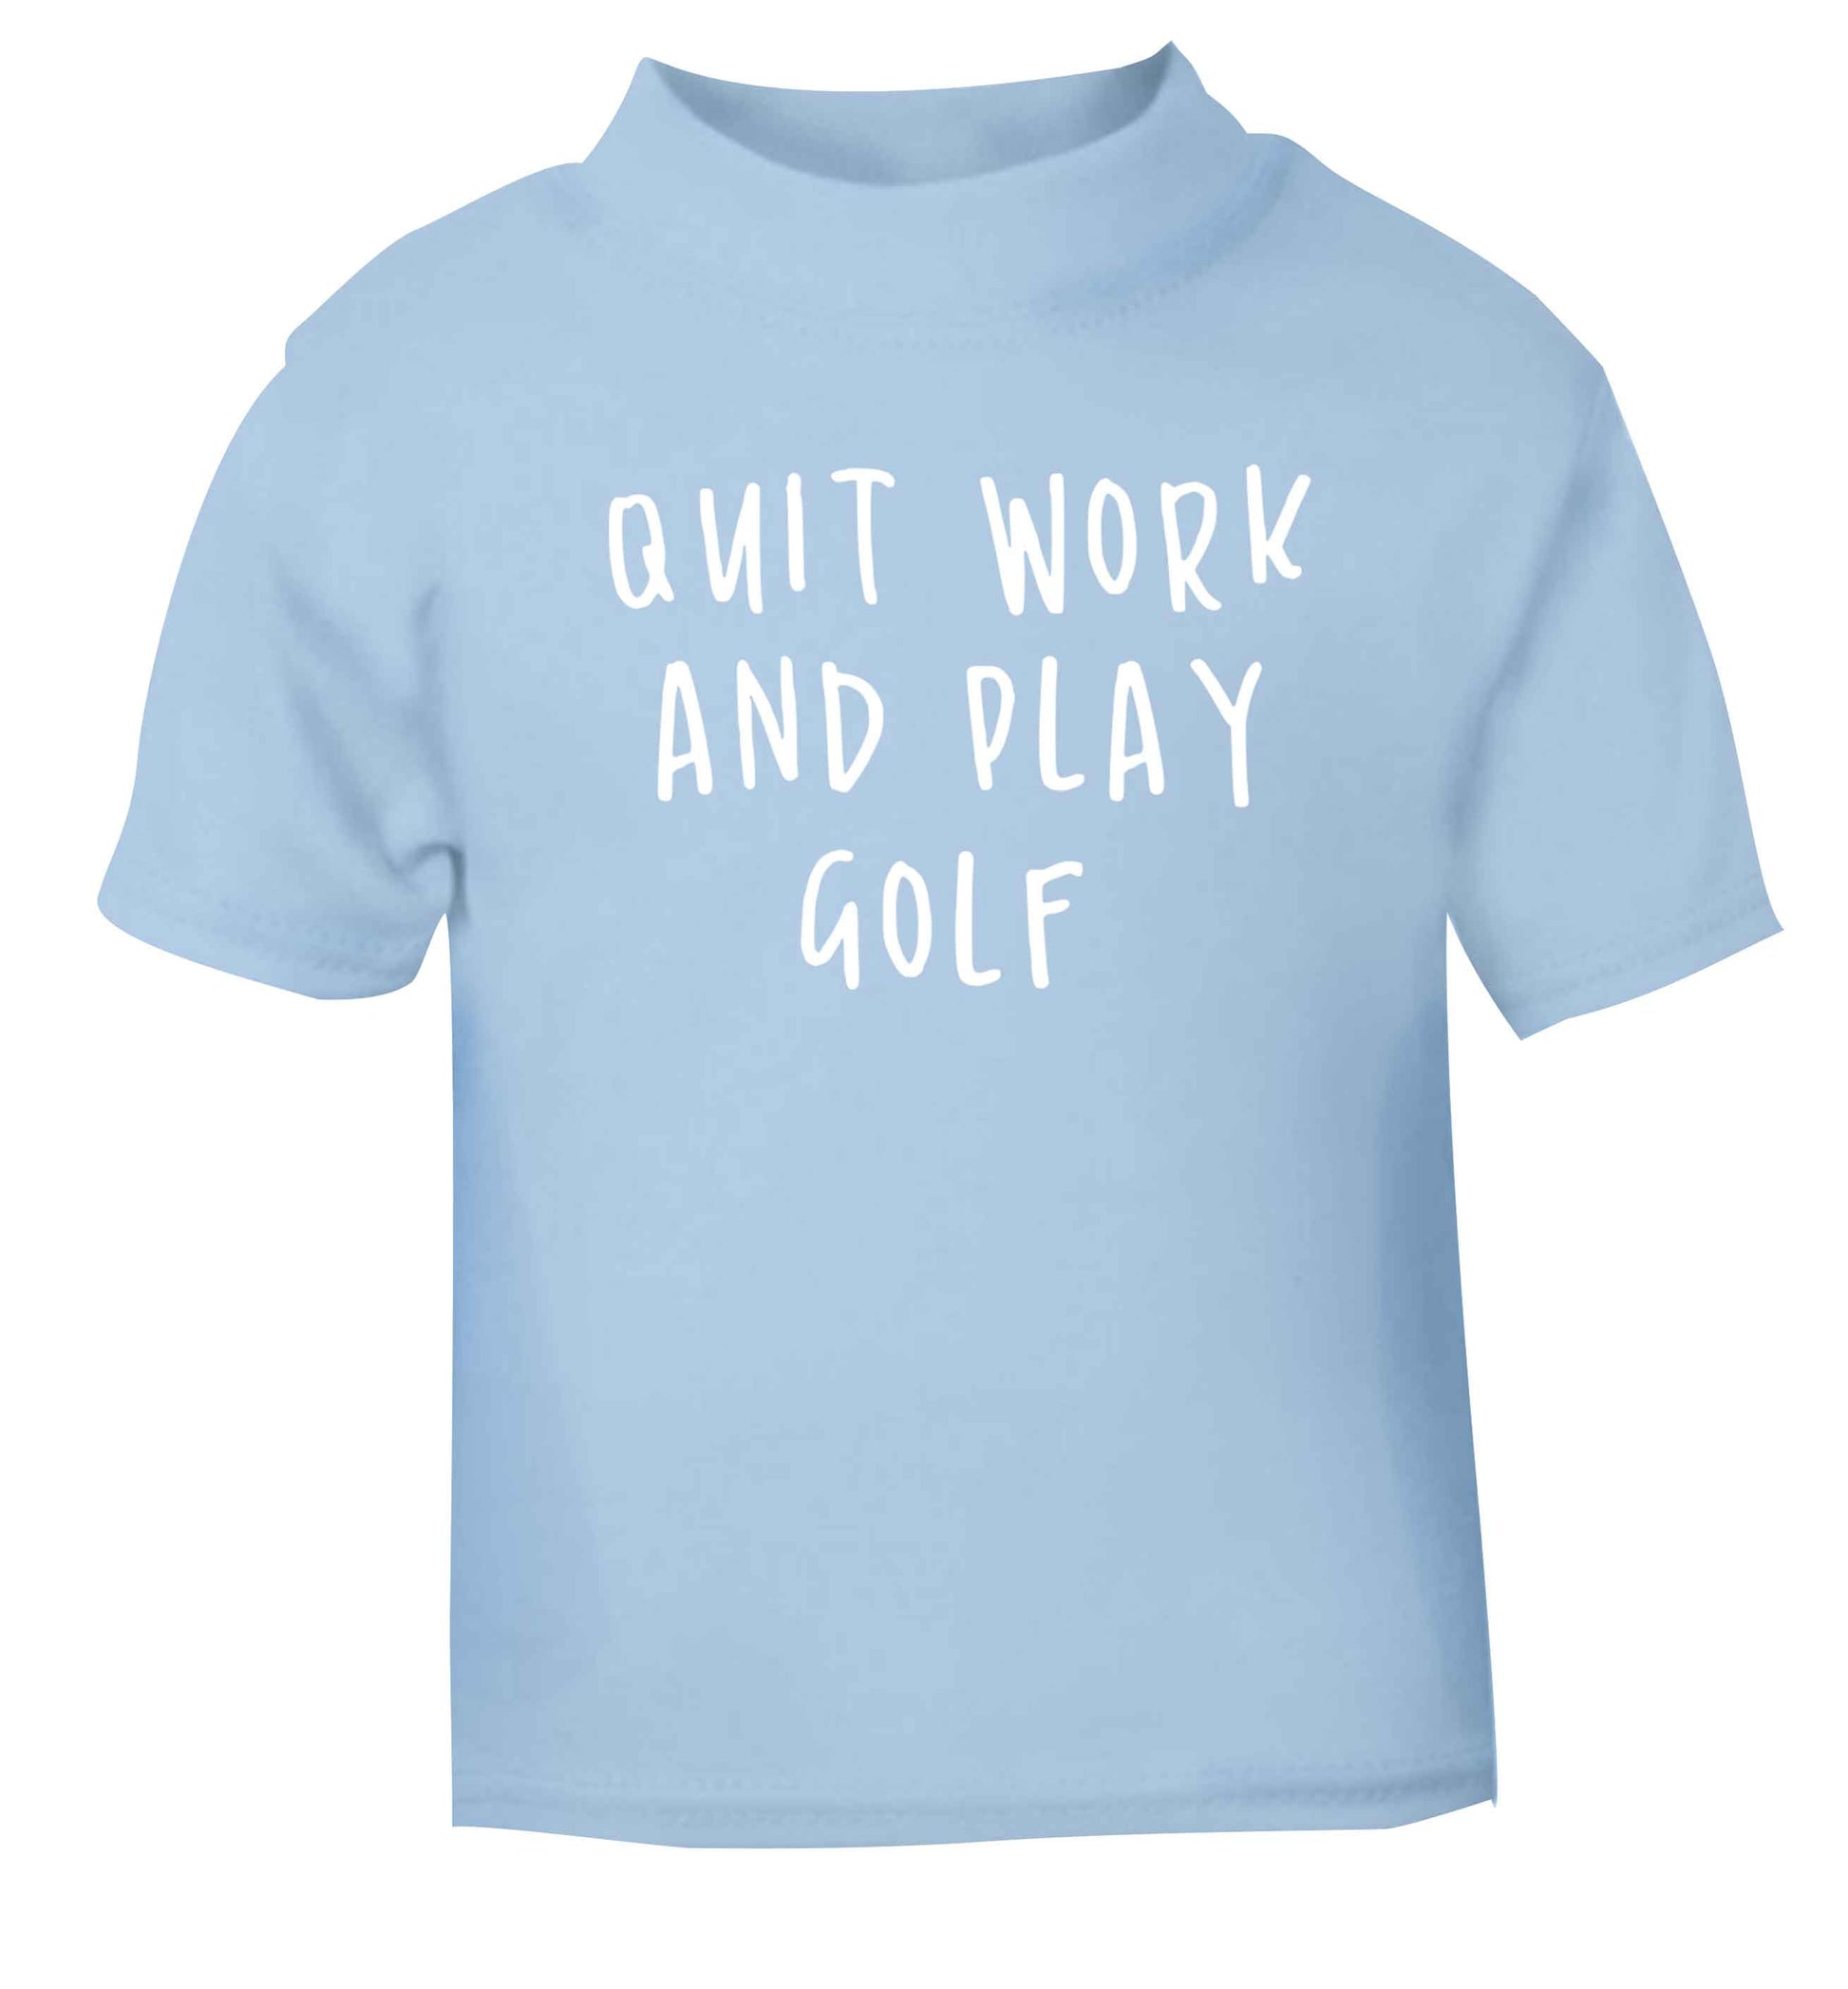 Quit work and play golf light blue Baby Toddler Tshirt 2 Years